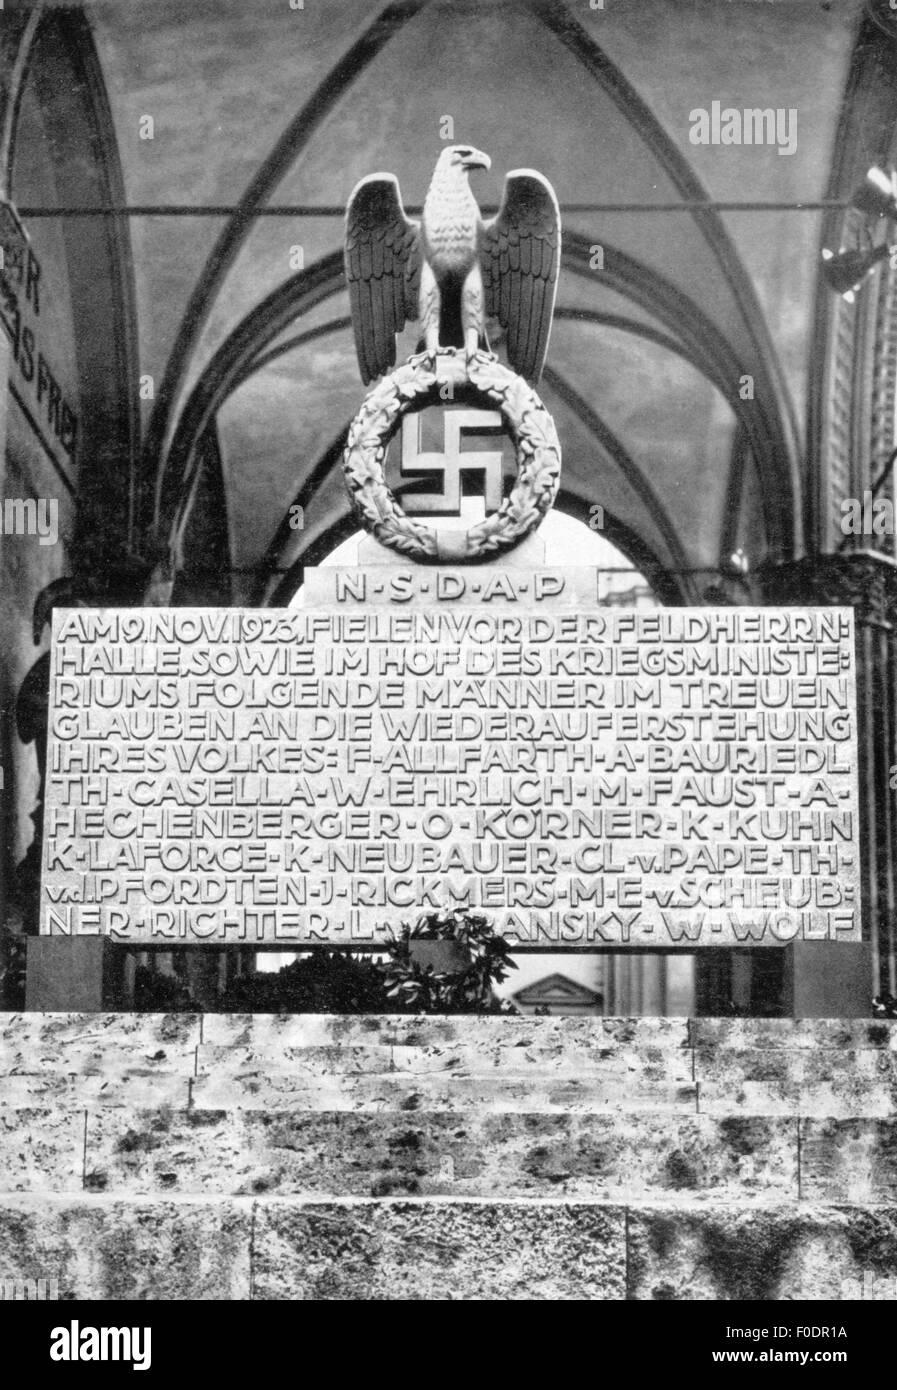 Nazism / National Socialism, propaganda, memorial plaque at the Feldherrnhalle (Field Marshals' Hall) in Munich, commemorating the dead of the Beer Hall Putsch 9.11.1923, view, circa 1935, NSDAP, Hitler Ludendorff putsch, Beer Hall Putsch 1923, Bavaria, Germany, German Reich, Third Reich, 1930s, 30s, 20th century, memorial plaque, commemorative plaque, commemorative plaques, commemorate, commemorating, view, views, historic, historical, Additional-Rights-Clearences-Not Available Stock Photo